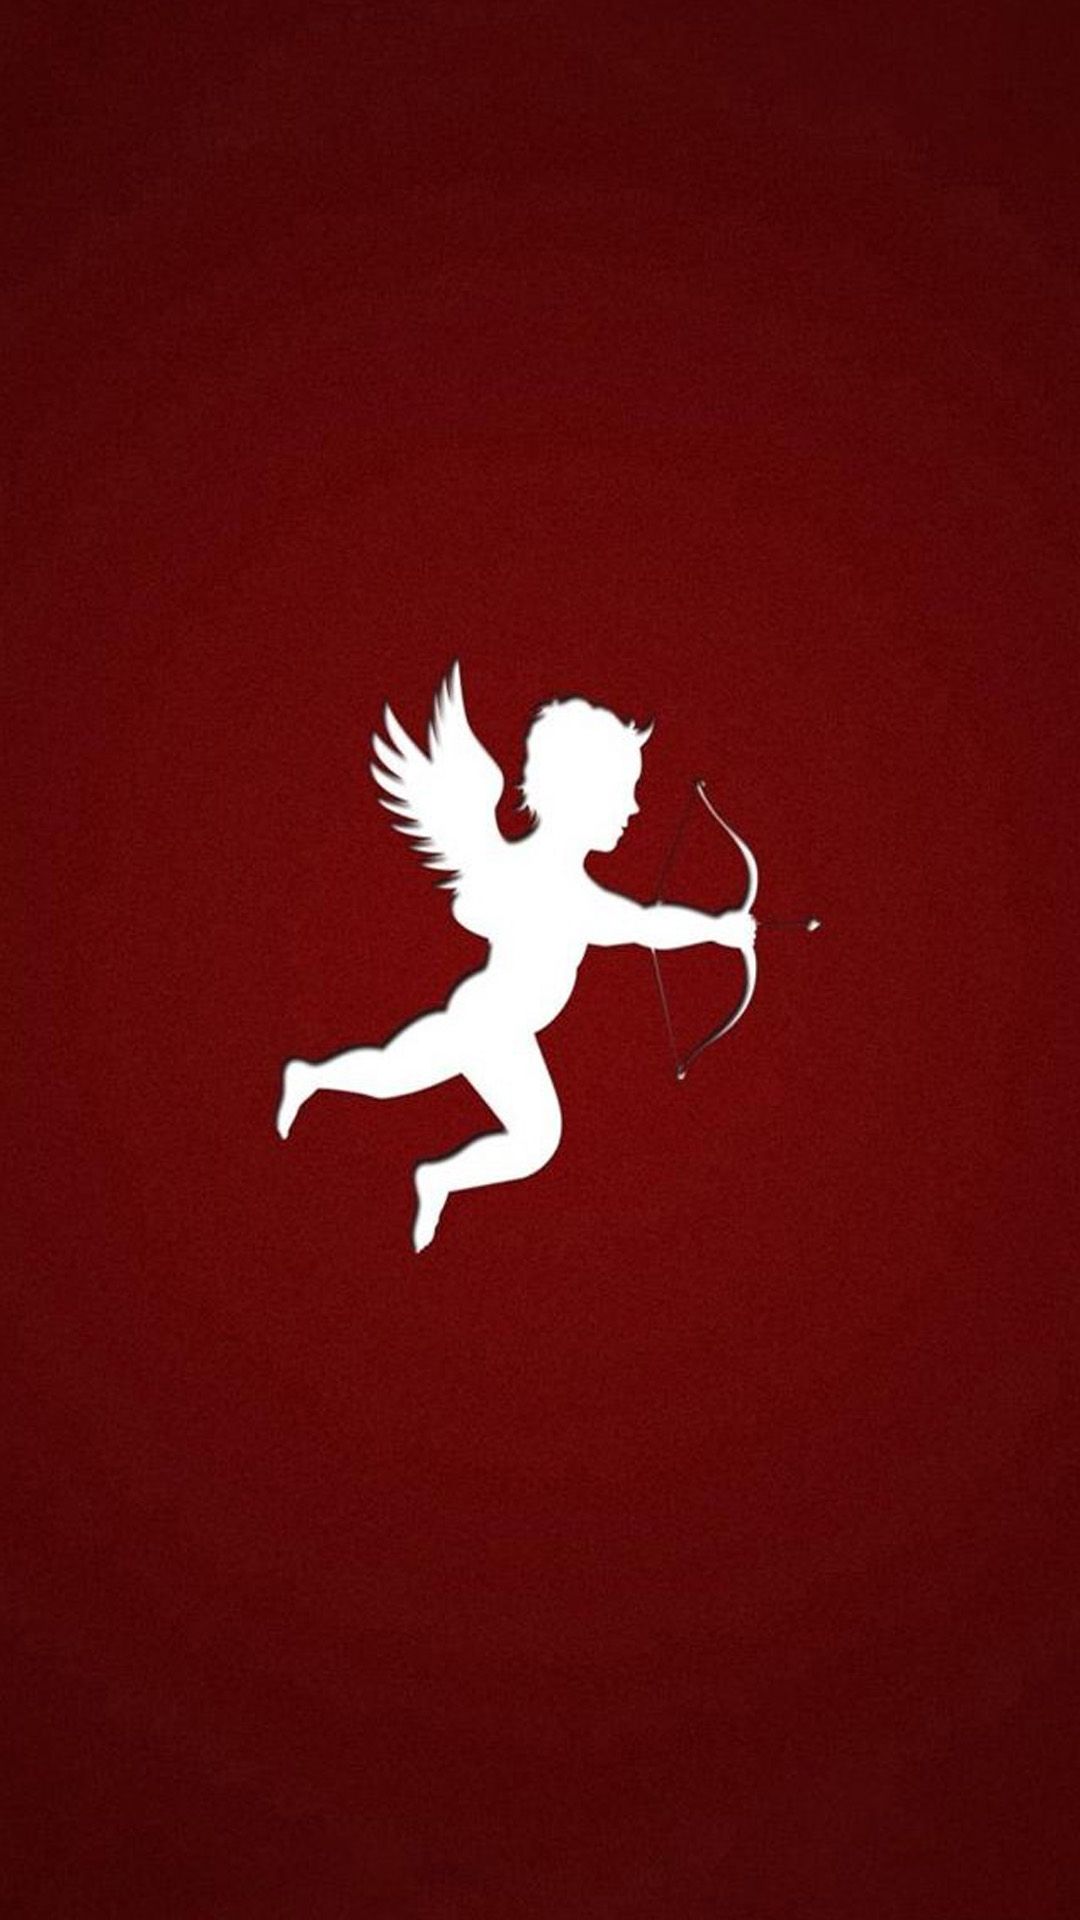 Simple The Arrow Of Cupid Outline Art iPhone Wallpaper